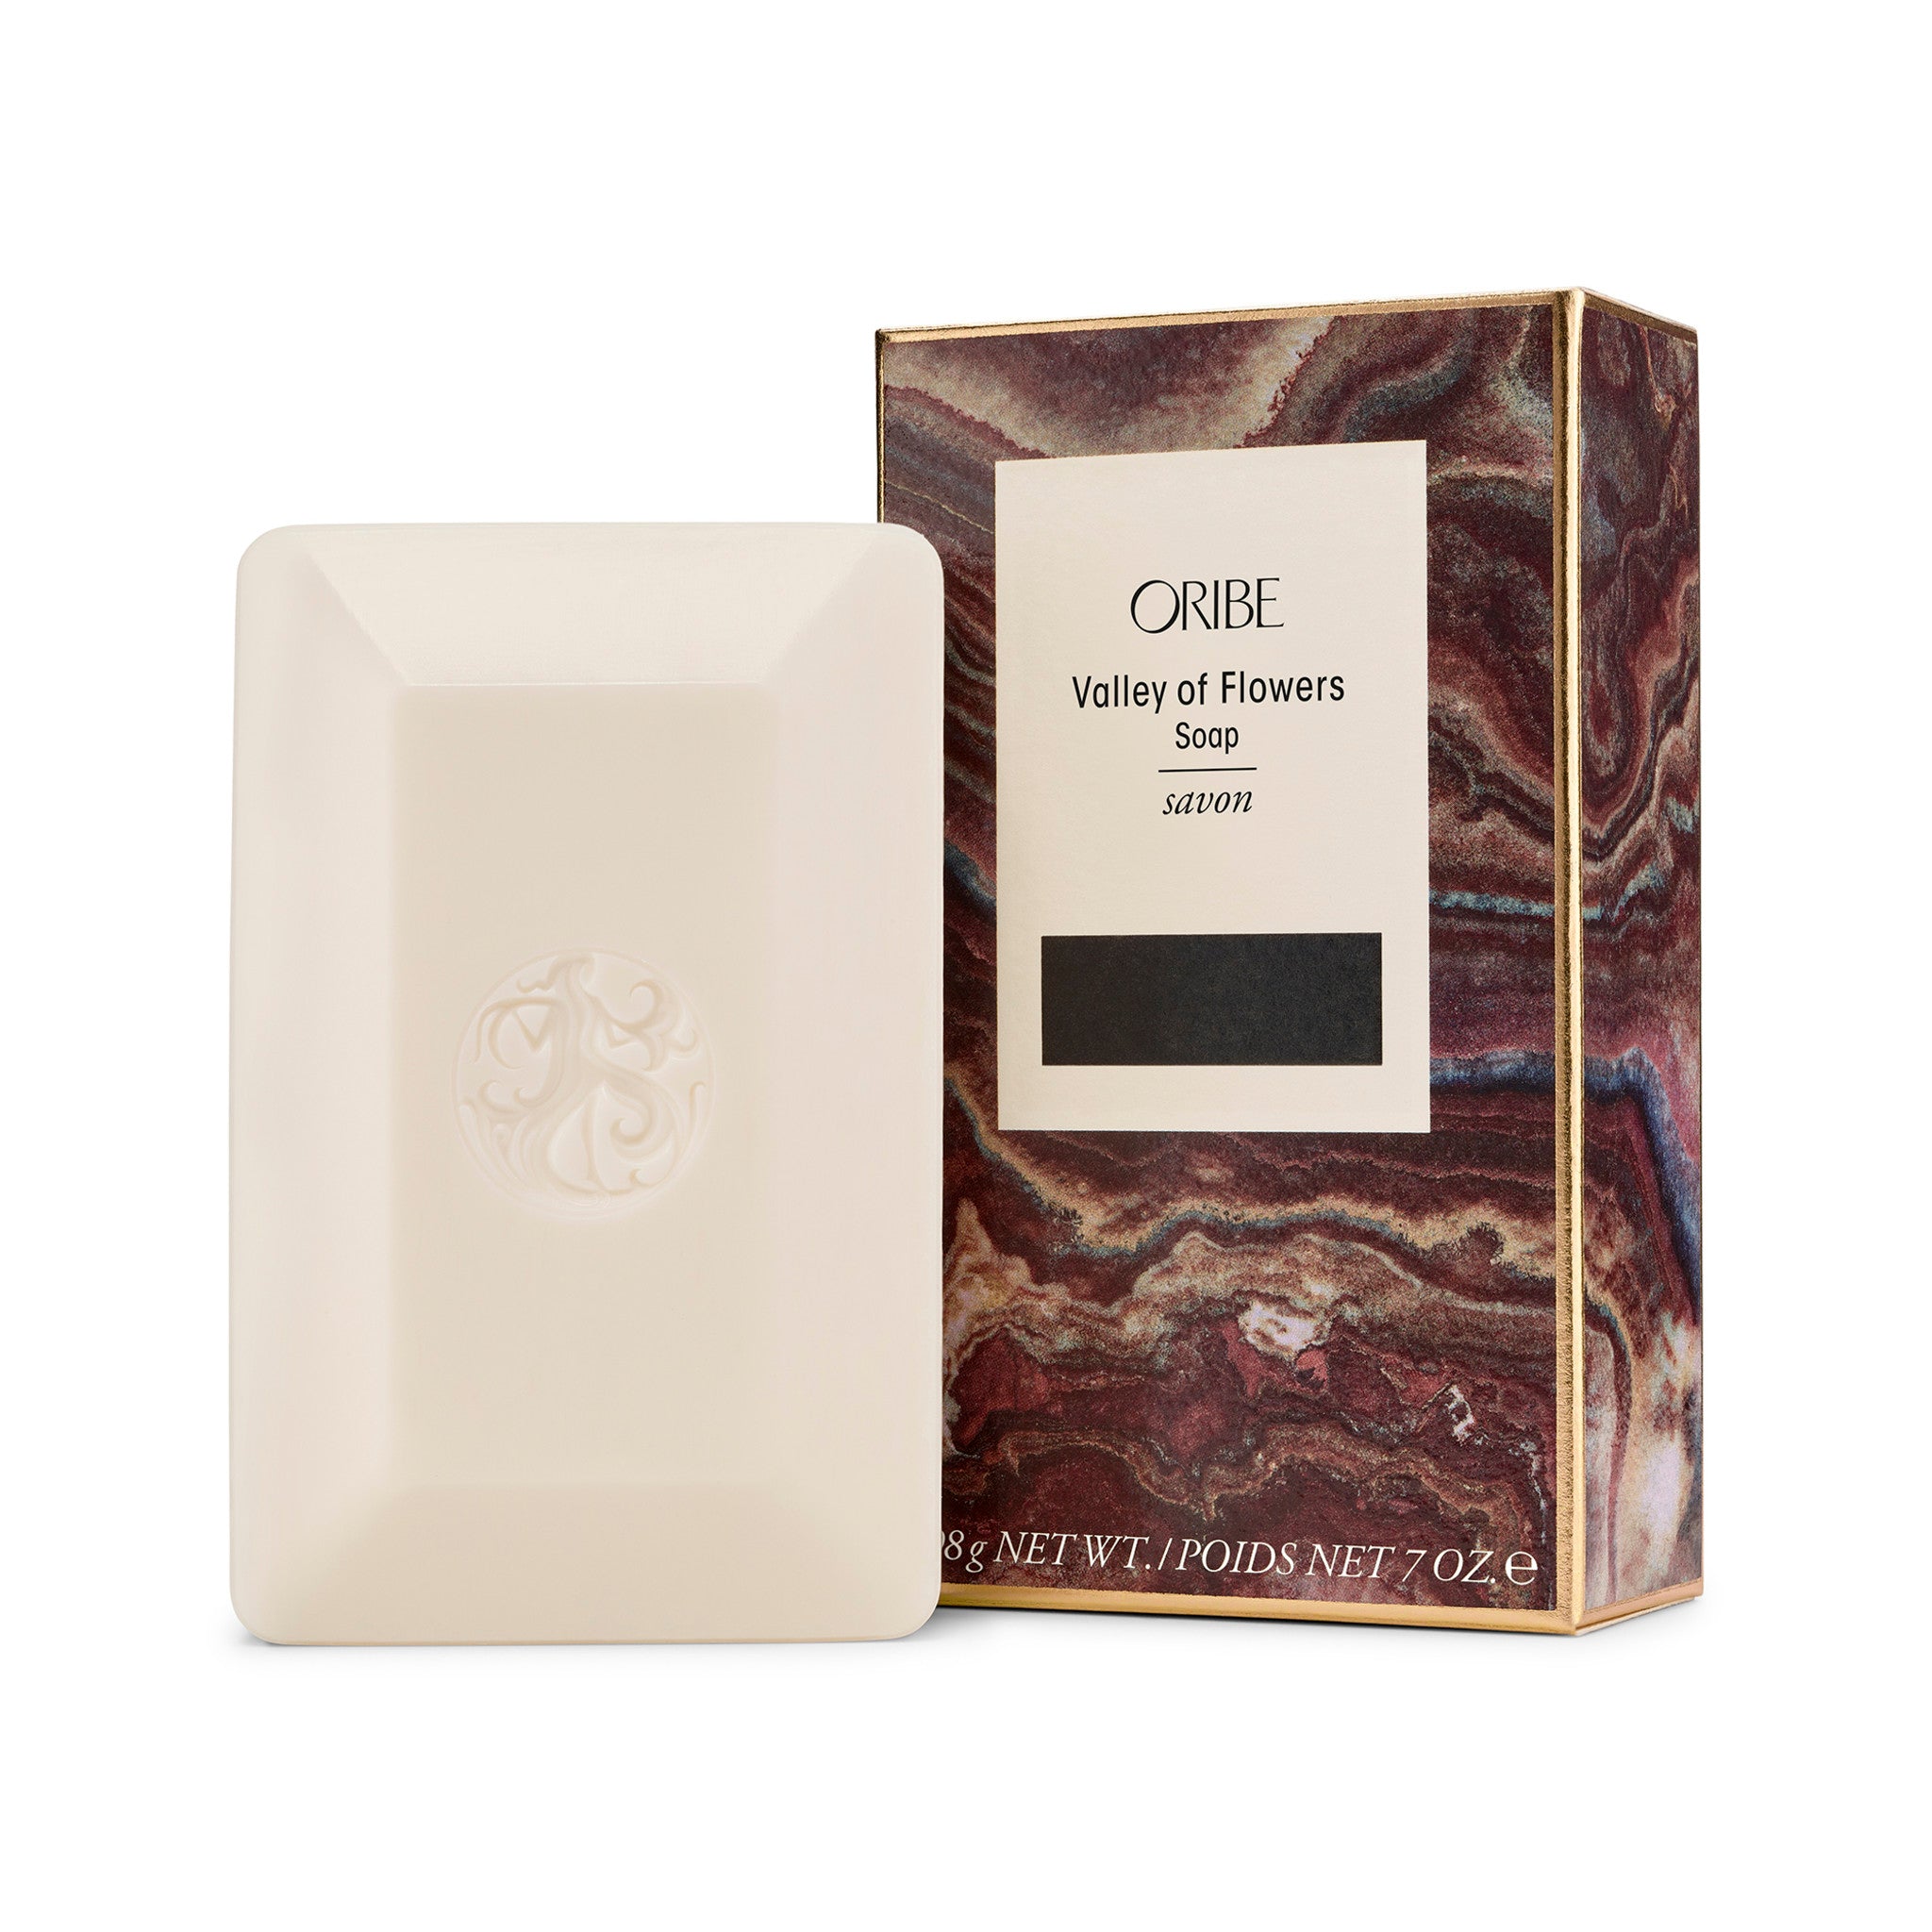 Oribe Valley of Flowers Bar Soap main image.